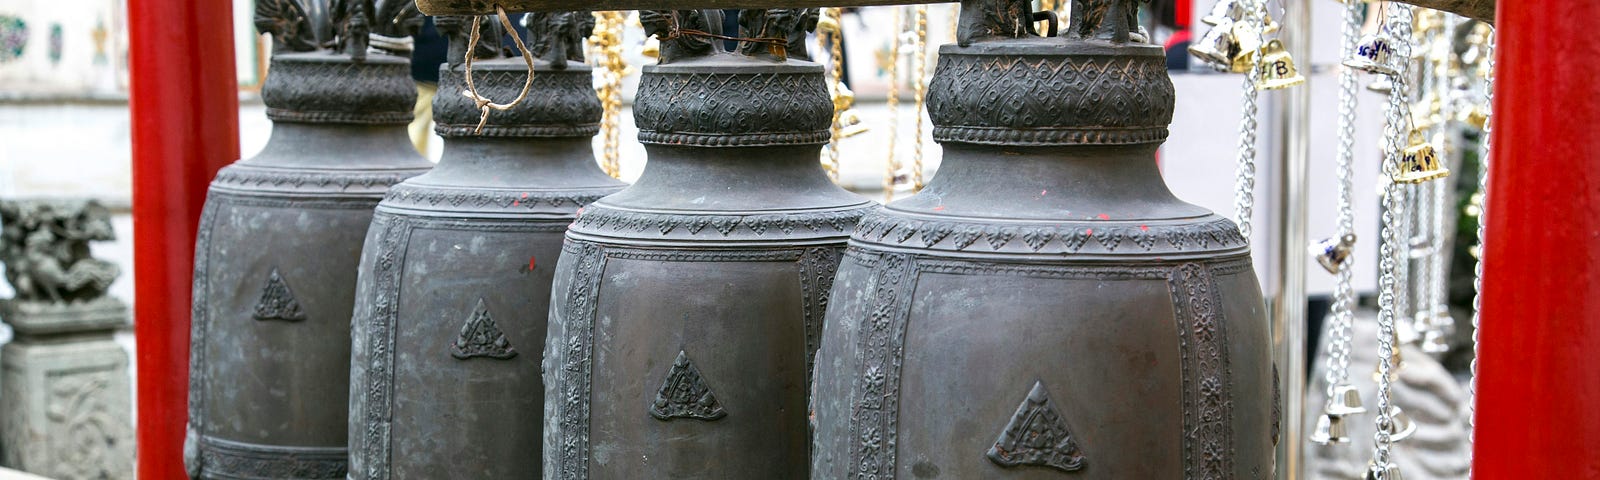 four large, brass bells, hanging outdoors from four chains